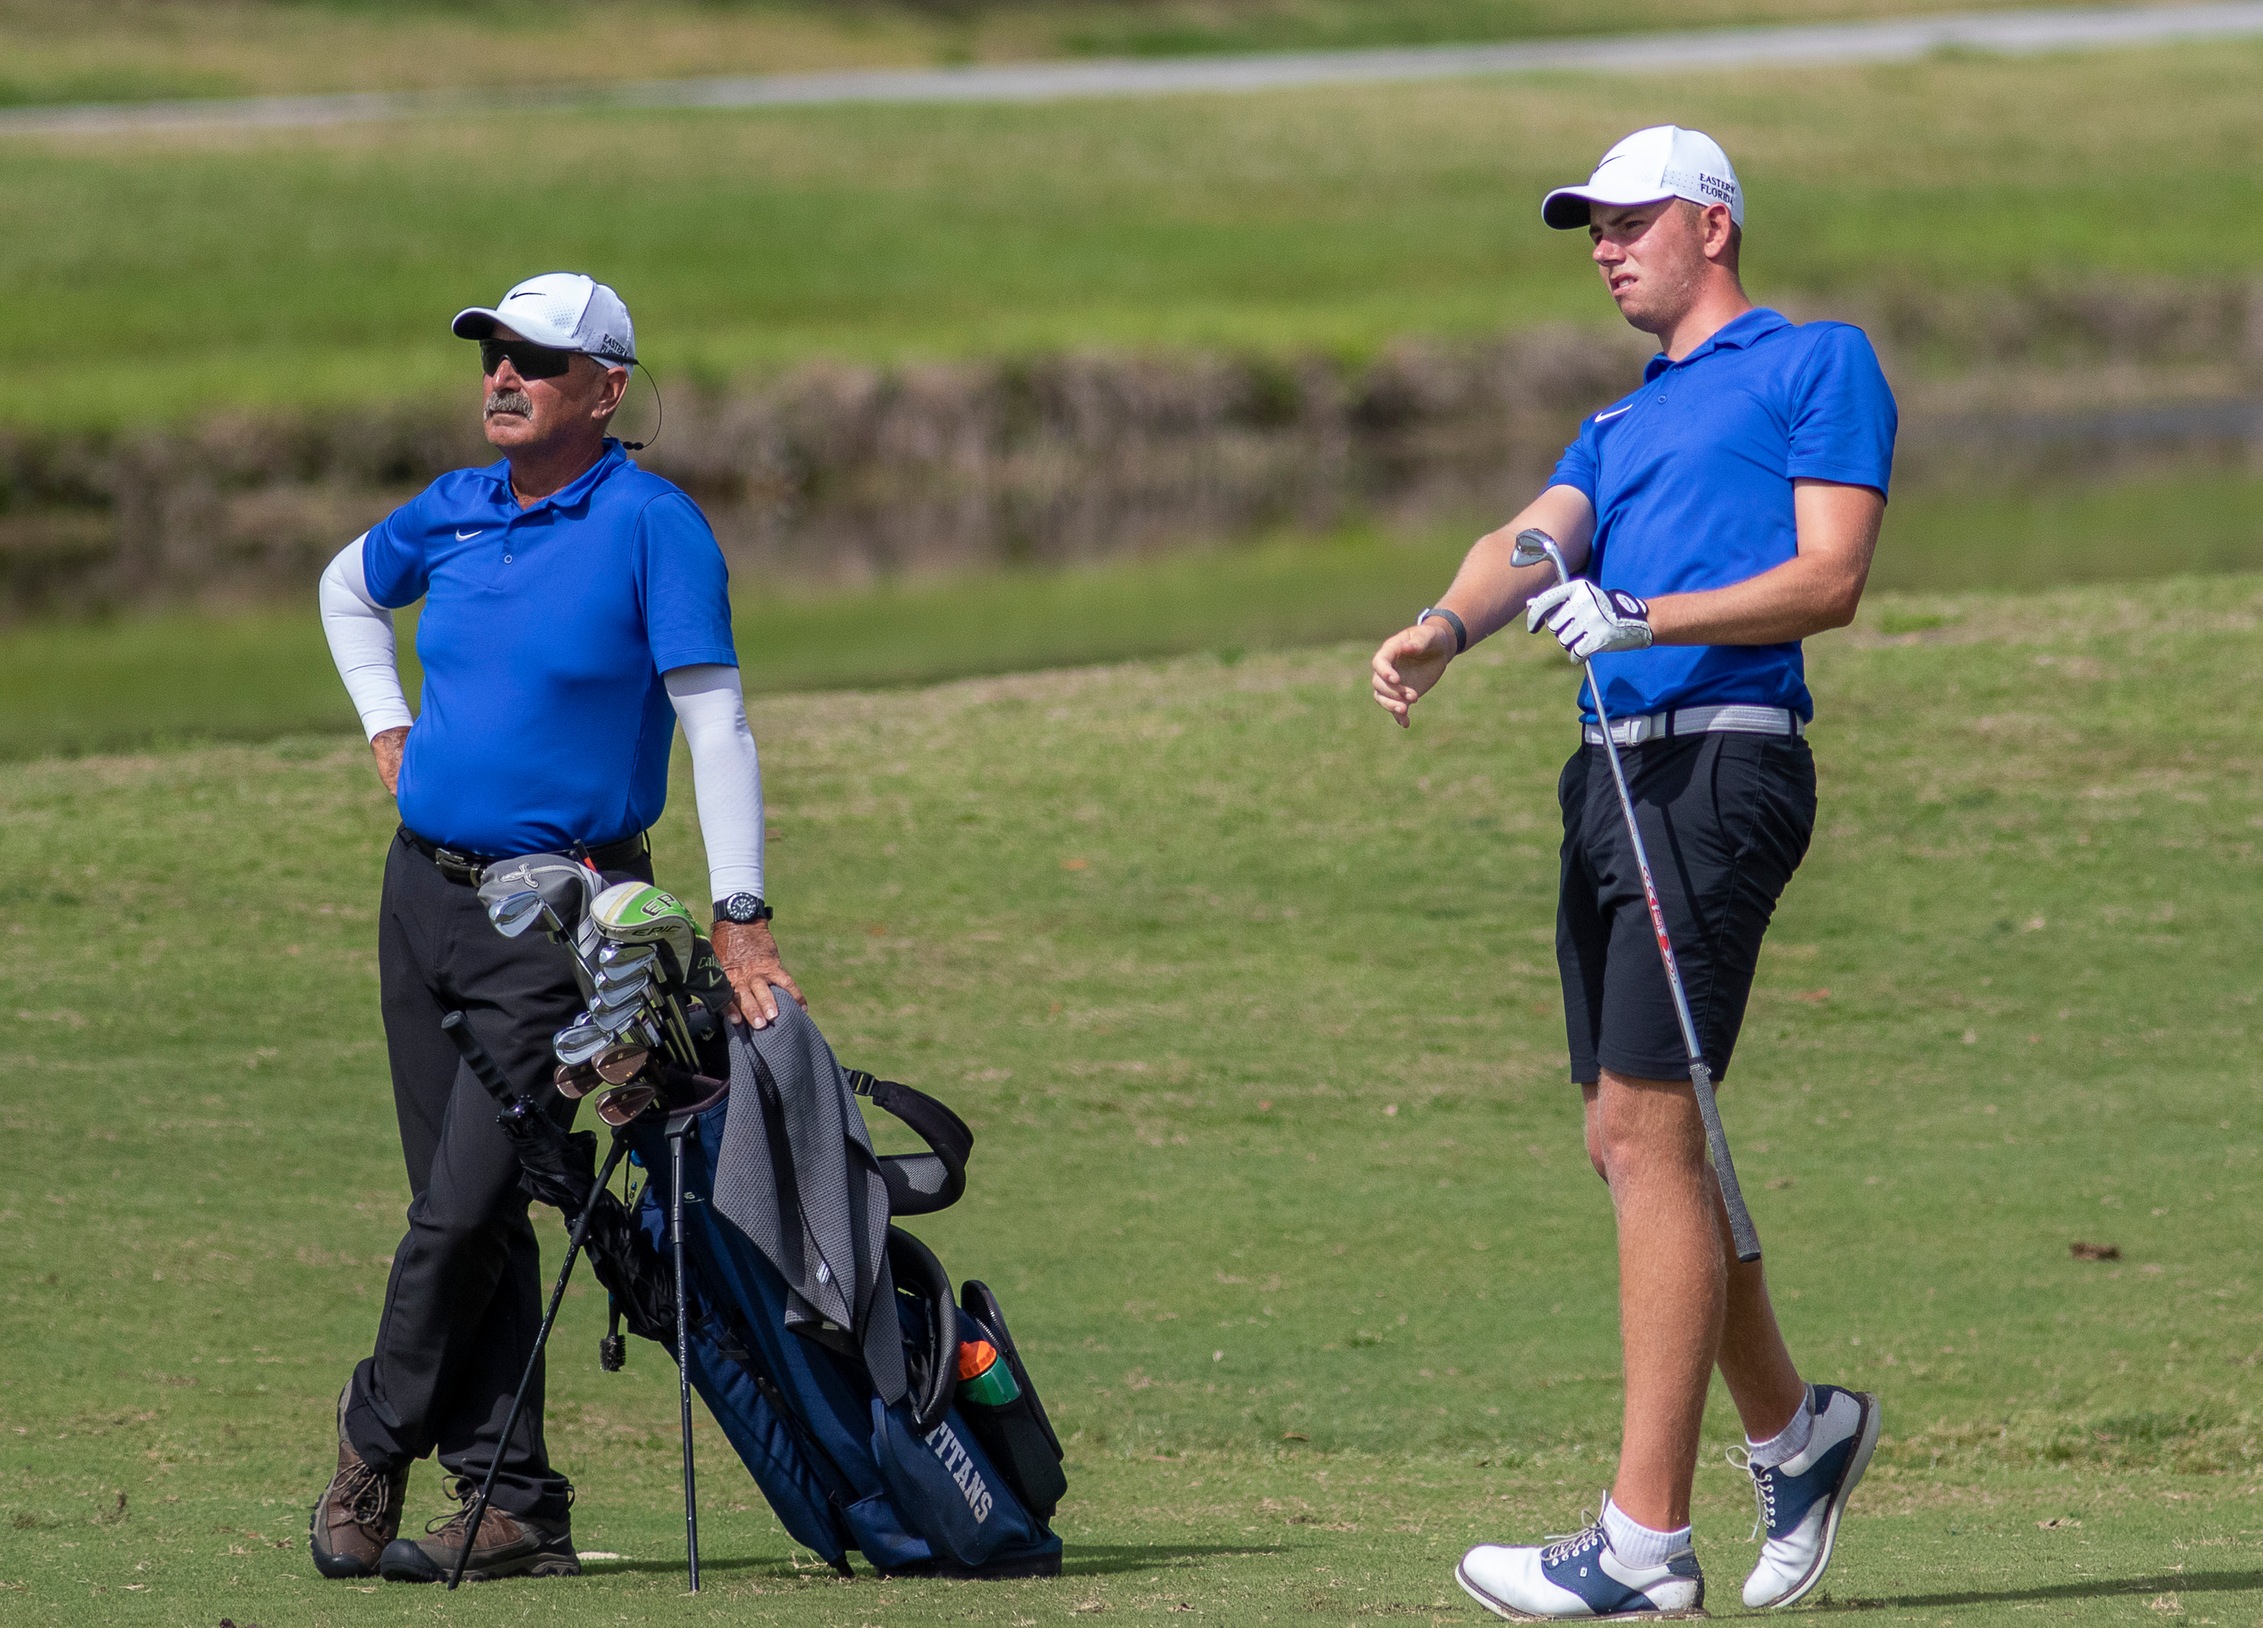 Men's golf team tied for third after one round of national tournament